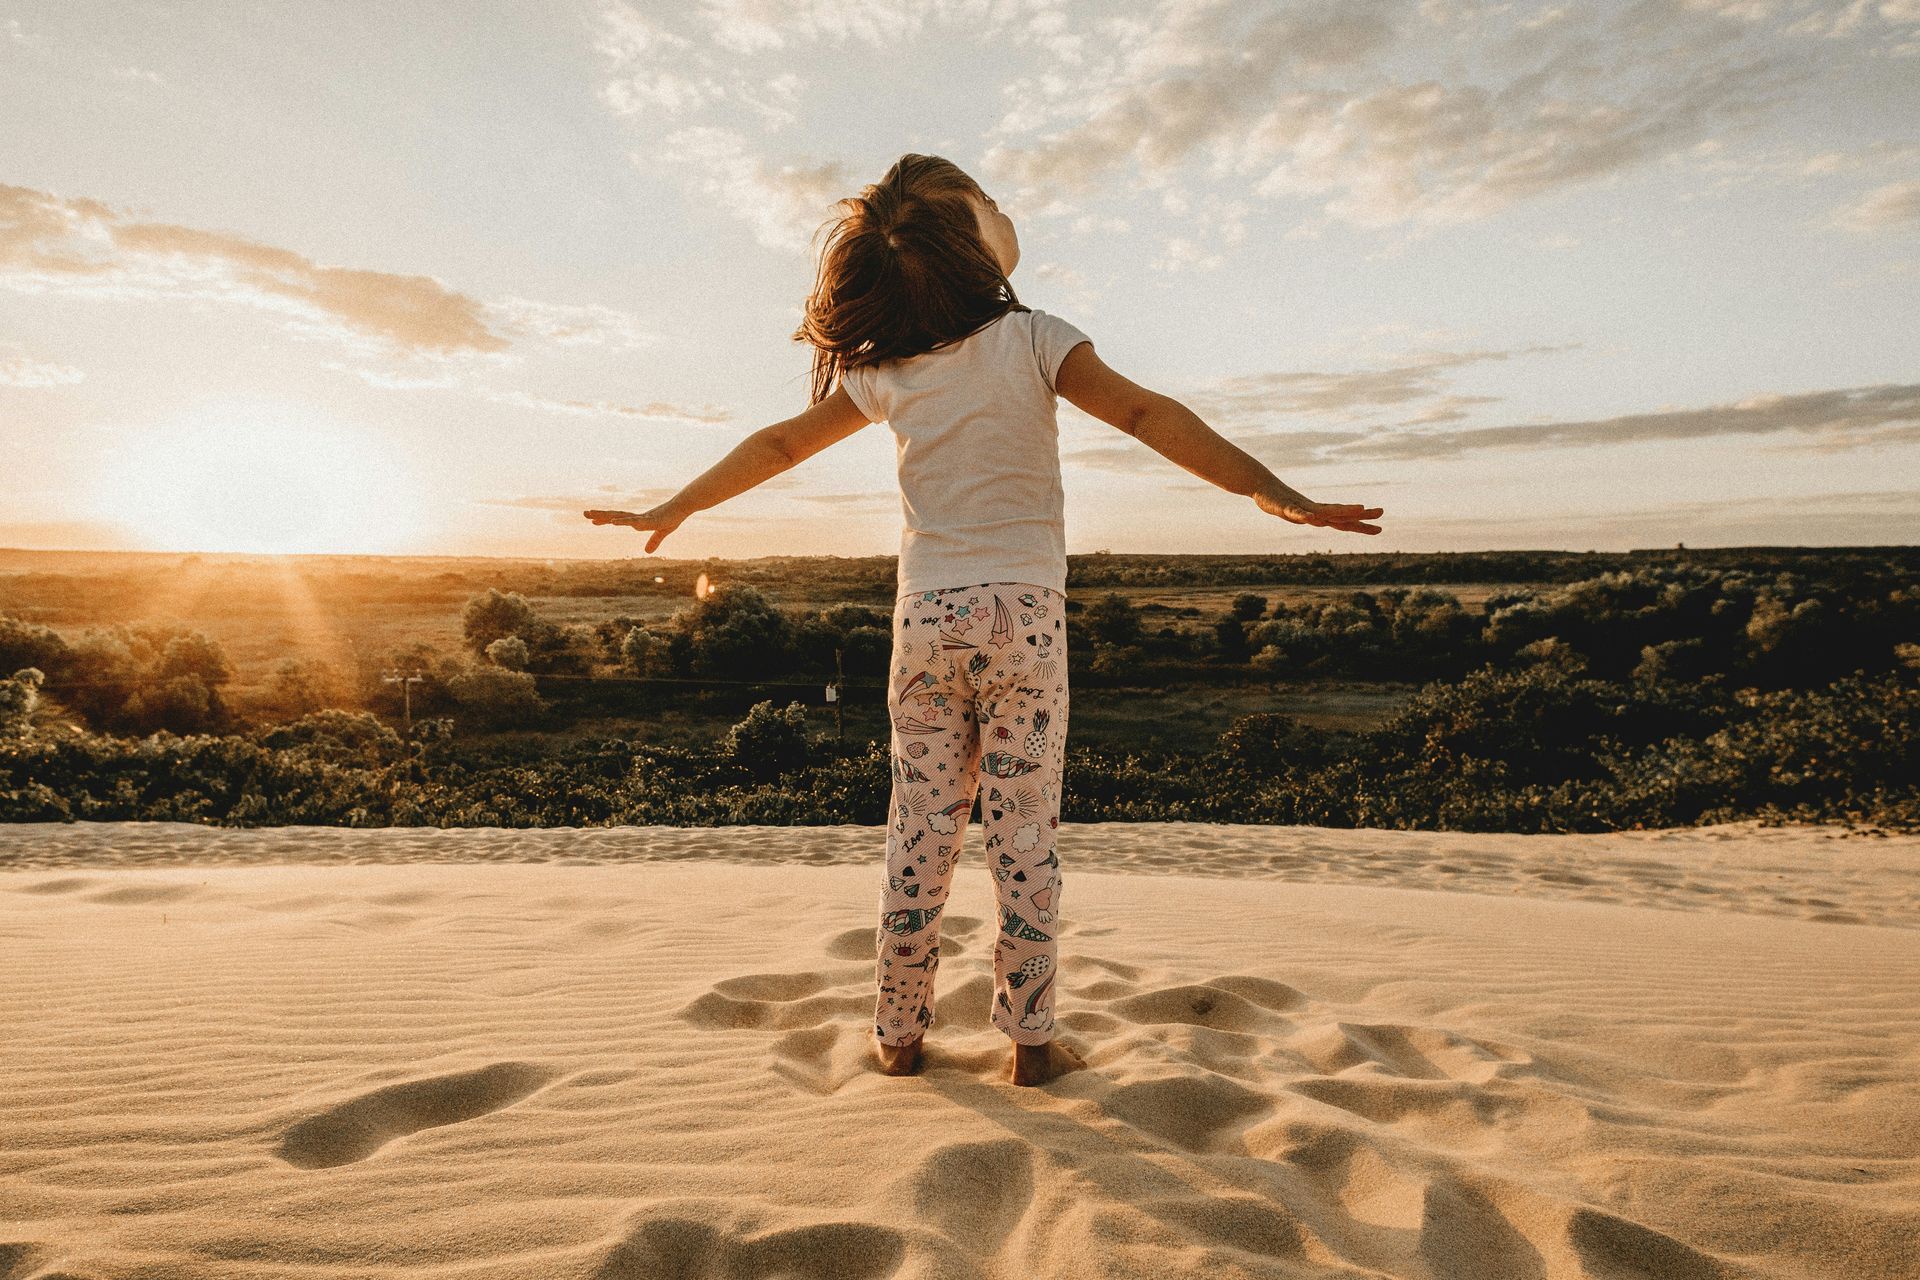 A little girl standing on top of a sand dune with her arms outstretched